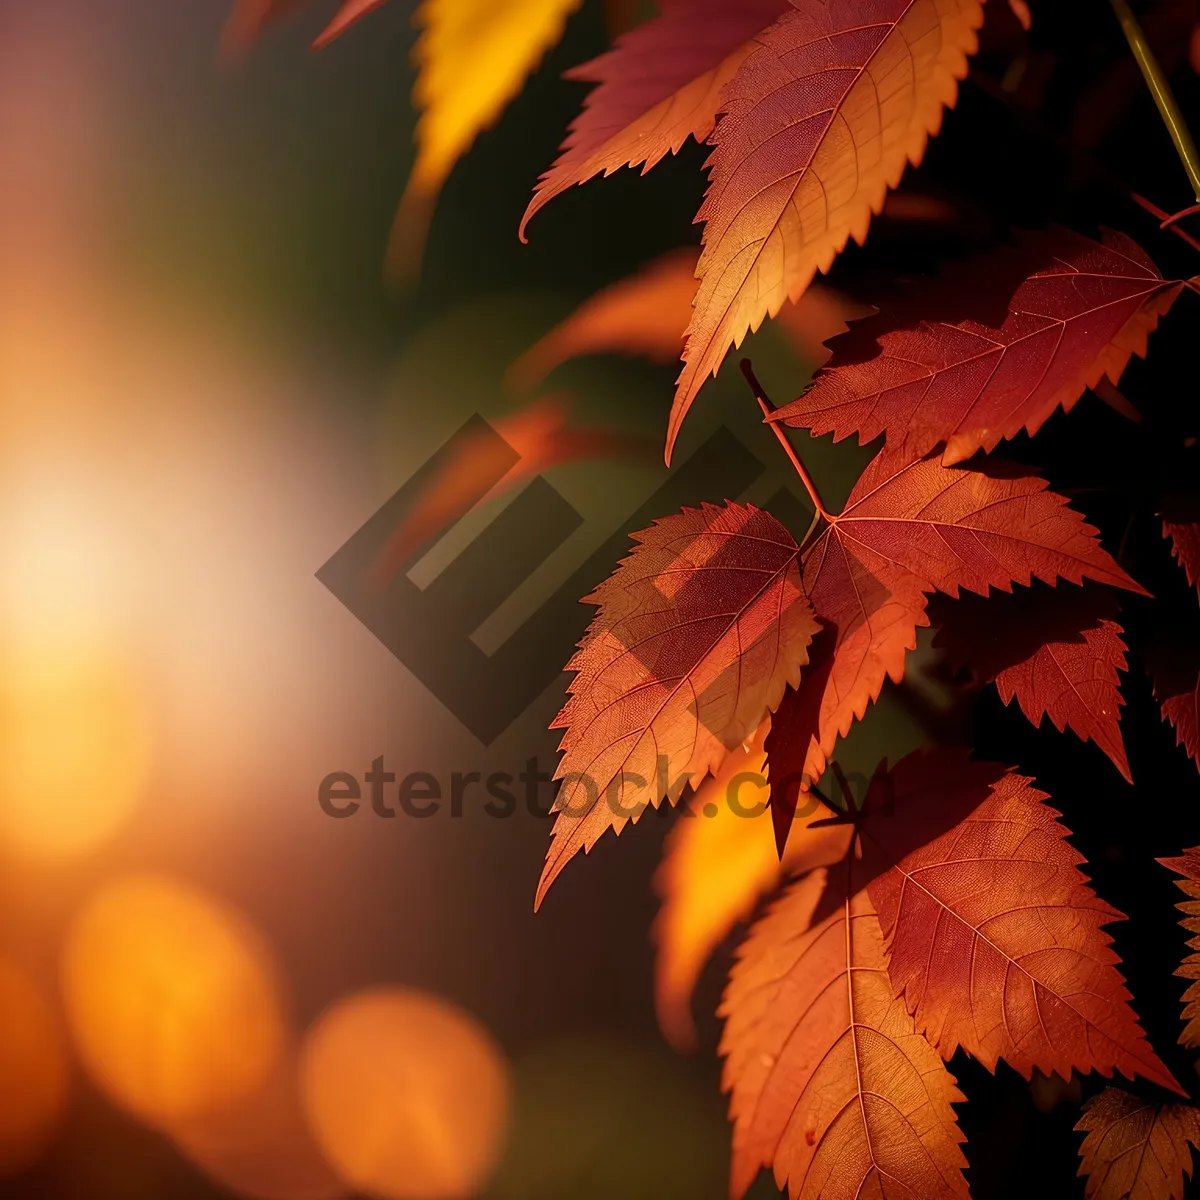 Picture of Autumn Leaf: Vibrant Colors of a Sumac Branch